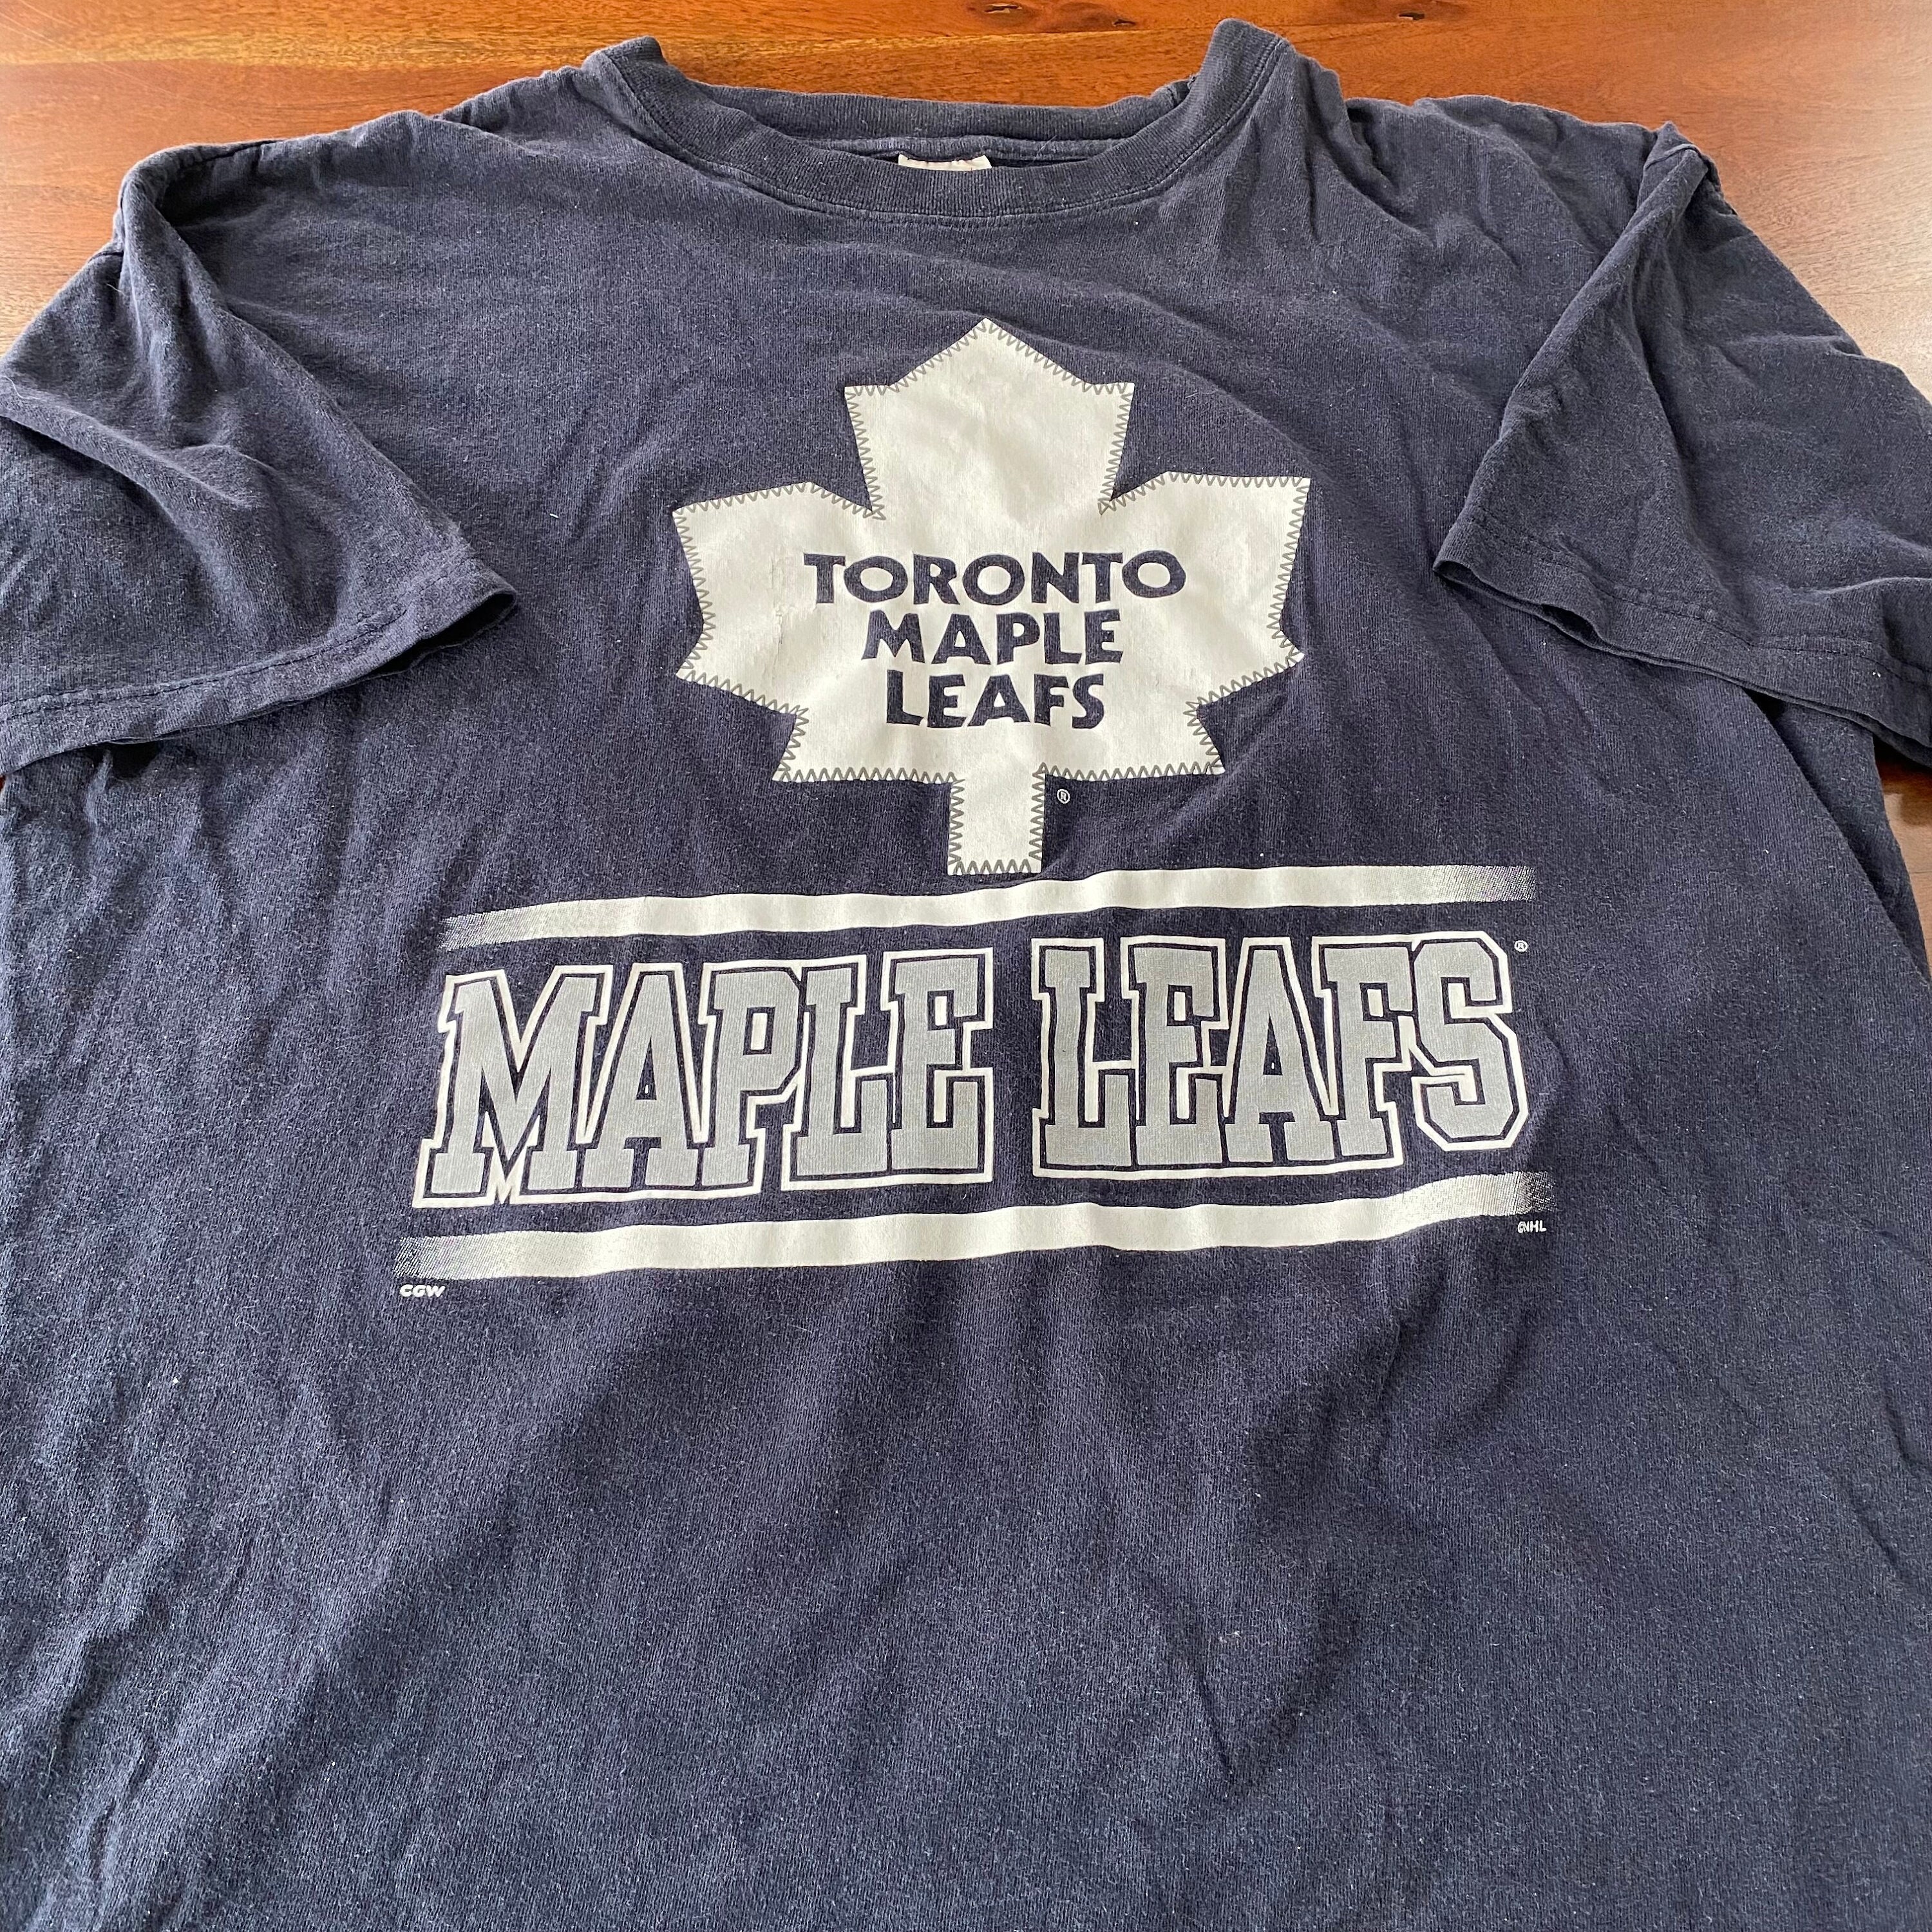 Personalized Vintage Toronto Maple Leafs Shirt 3D Powerful Design Gift -  Personalized Gifts: Family, Sports, Occasions, Trending